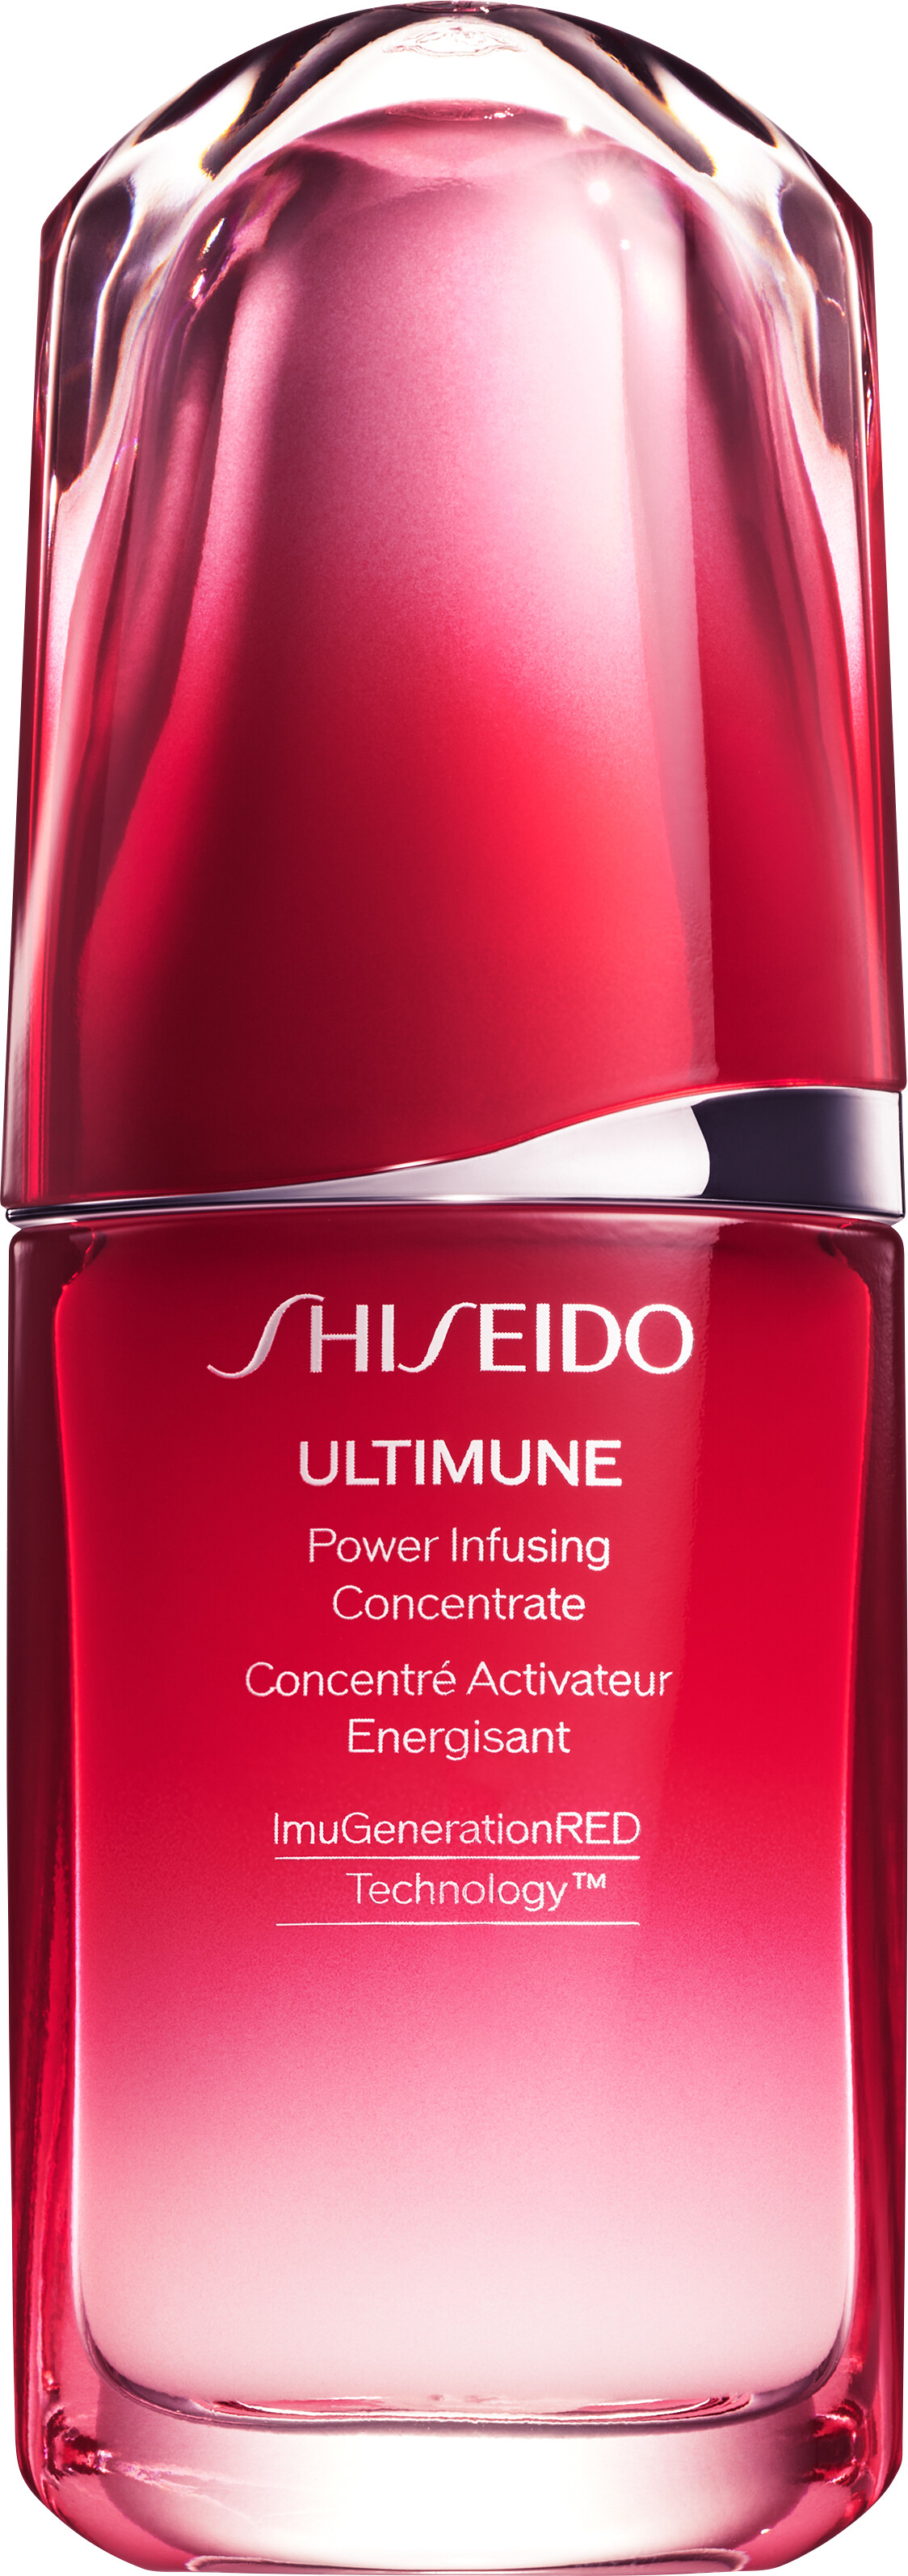 Shiseido Ultimune Power Infusing Concentrate with ImuGenerationRED Technology 3.0 50ml